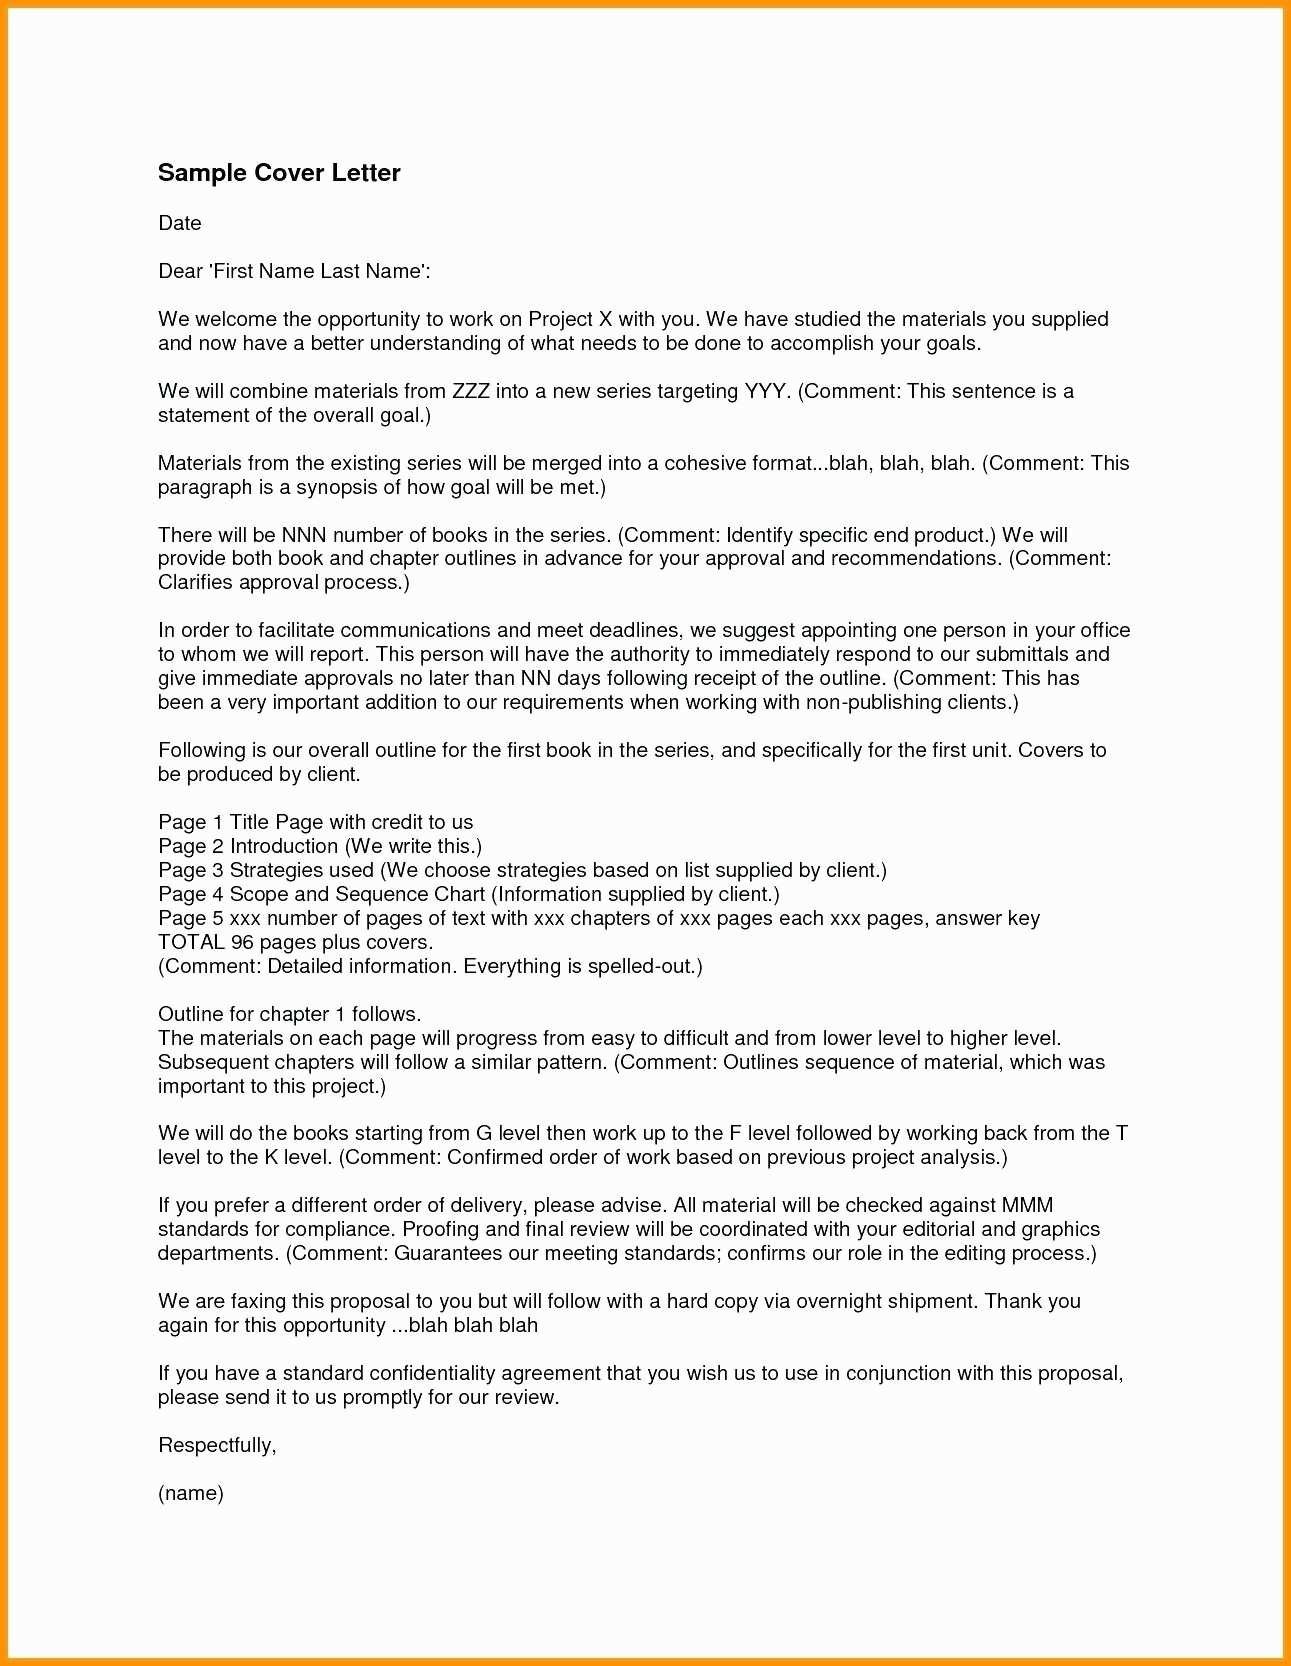 Form Letter Email Outlook Fresh Write Meeting Invitation Unique Document Request Sample Client